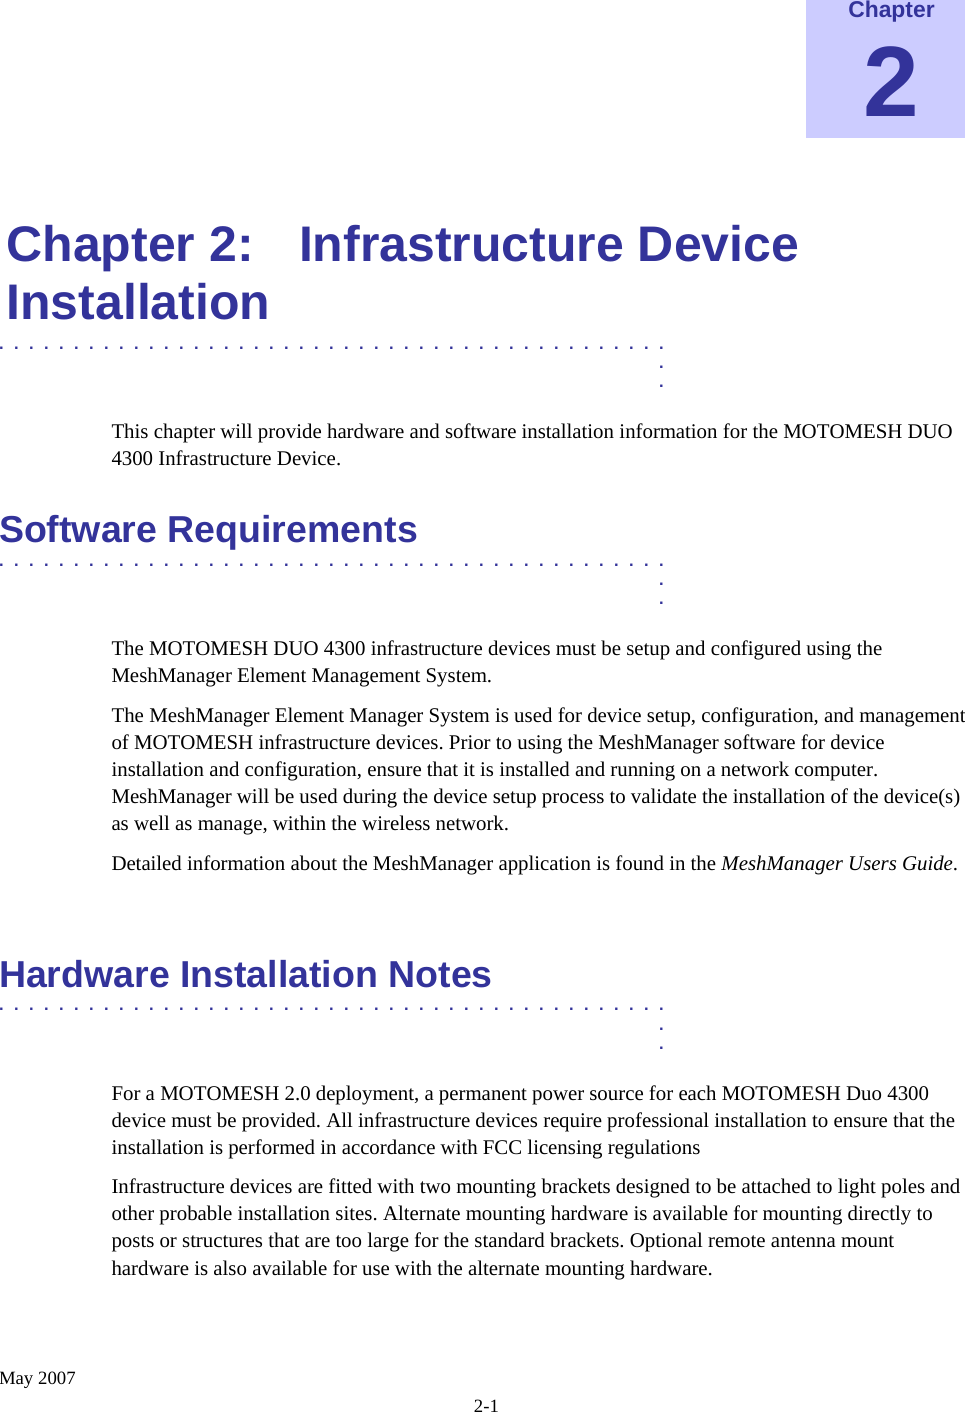    May 2007 2-1 Chapter 2  Chapter 2:  Infrastructure Device Installation .............................................  .  . This chapter will provide hardware and software installation information for the MOTOMESH DUO 4300 Infrastructure Device. Software Requirements .............................................  .  . The MOTOMESH DUO 4300 infrastructure devices must be setup and configured using the MeshManager Element Management System. The MeshManager Element Manager System is used for device setup, configuration, and management of MOTOMESH infrastructure devices. Prior to using the MeshManager software for device installation and configuration, ensure that it is installed and running on a network computer.  MeshManager will be used during the device setup process to validate the installation of the device(s) as well as manage, within the wireless network. Detailed information about the MeshManager application is found in the MeshManager Users Guide.  Hardware Installation Notes .............................................  .  . For a MOTOMESH 2.0 deployment, a permanent power source for each MOTOMESH Duo 4300 device must be provided. All infrastructure devices require professional installation to ensure that the installation is performed in accordance with FCC licensing regulations Infrastructure devices are fitted with two mounting brackets designed to be attached to light poles and other probable installation sites. Alternate mounting hardware is available for mounting directly to posts or structures that are too large for the standard brackets. Optional remote antenna mount hardware is also available for use with the alternate mounting hardware. 